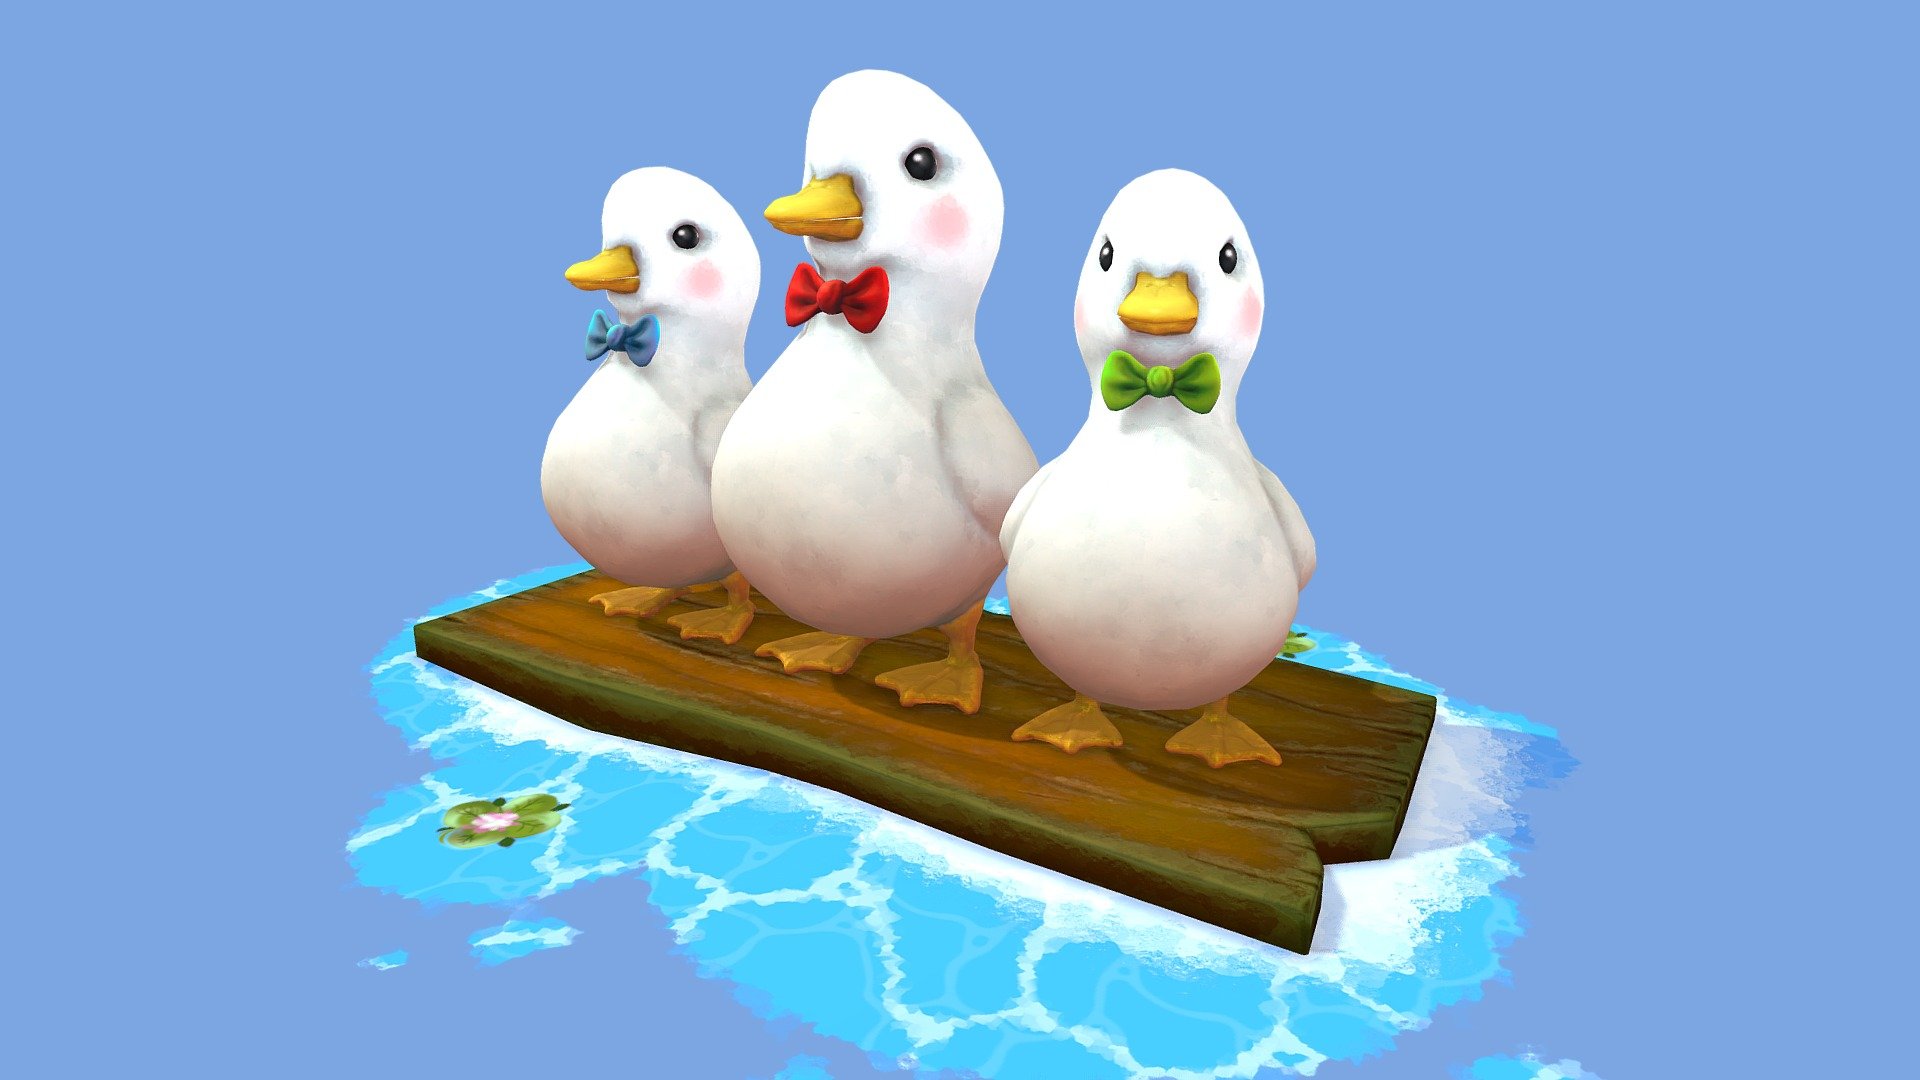 A small sculpting project I have been working on! Hi poly - Lo Poly bakes! Had a lot of fun working on this one! Hope you enjoy the cuteness of call ducks as much as I do! :)

Follow me on my socials! :) 

linktr.ee/Macd3d - Cute Call Ducks - Buy Royalty Free 3D model by Macd3d 3d model